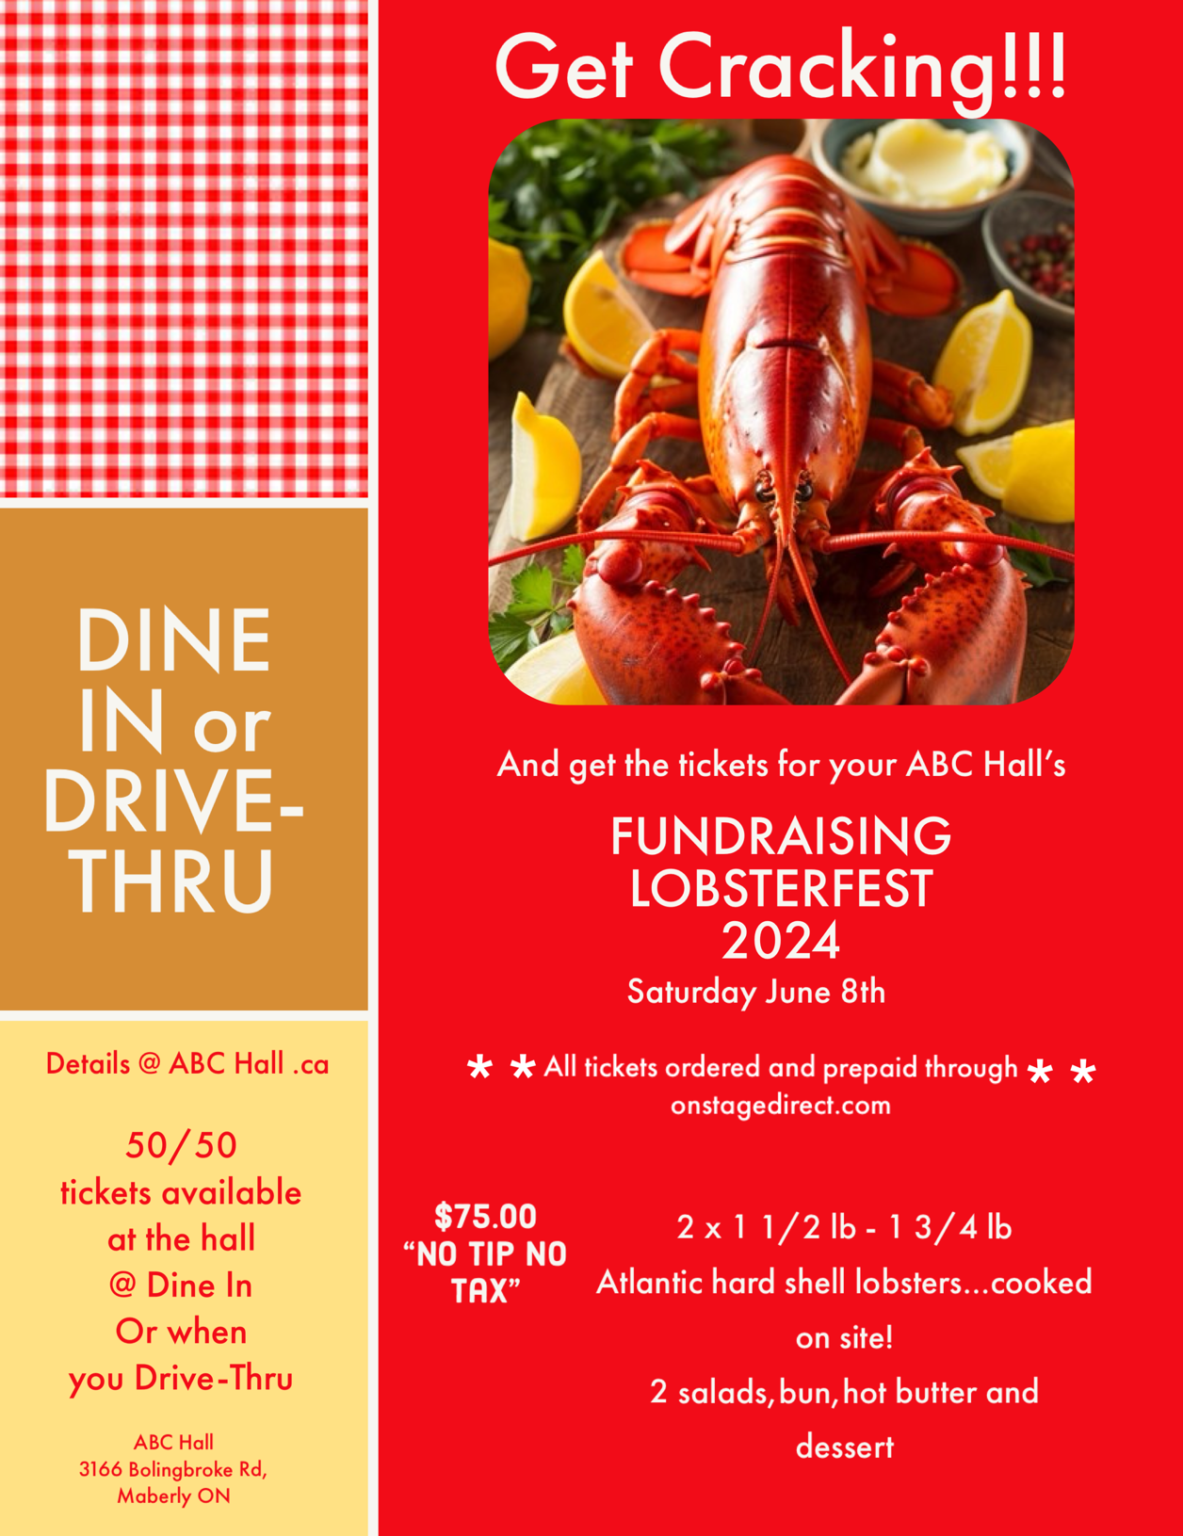 When Does Lobsterfest End In 2024 Lory Donnamarie